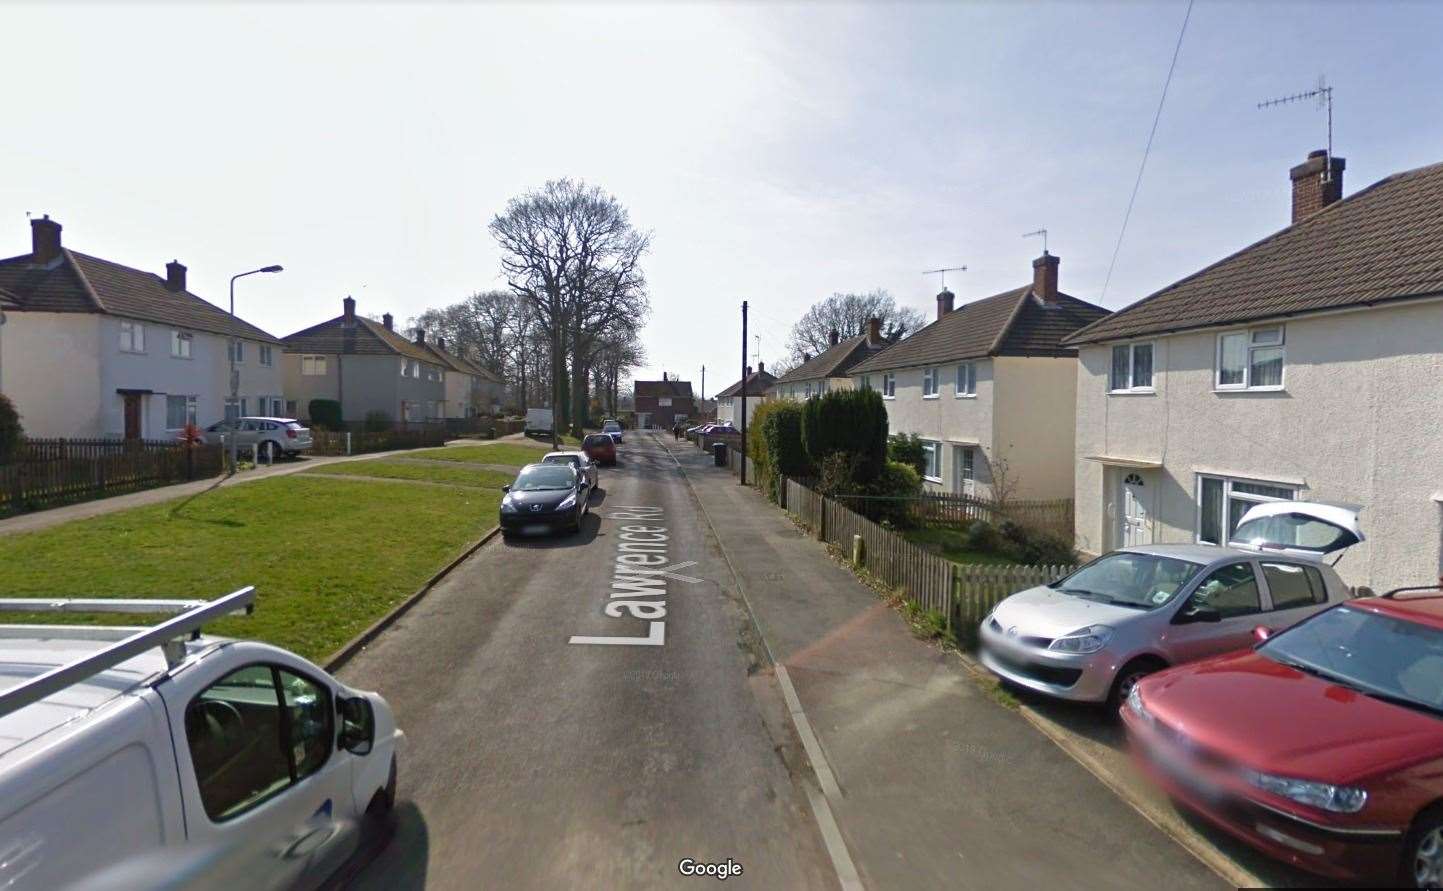 Emergency services were called to Lawrence Road Credit to Google Maps